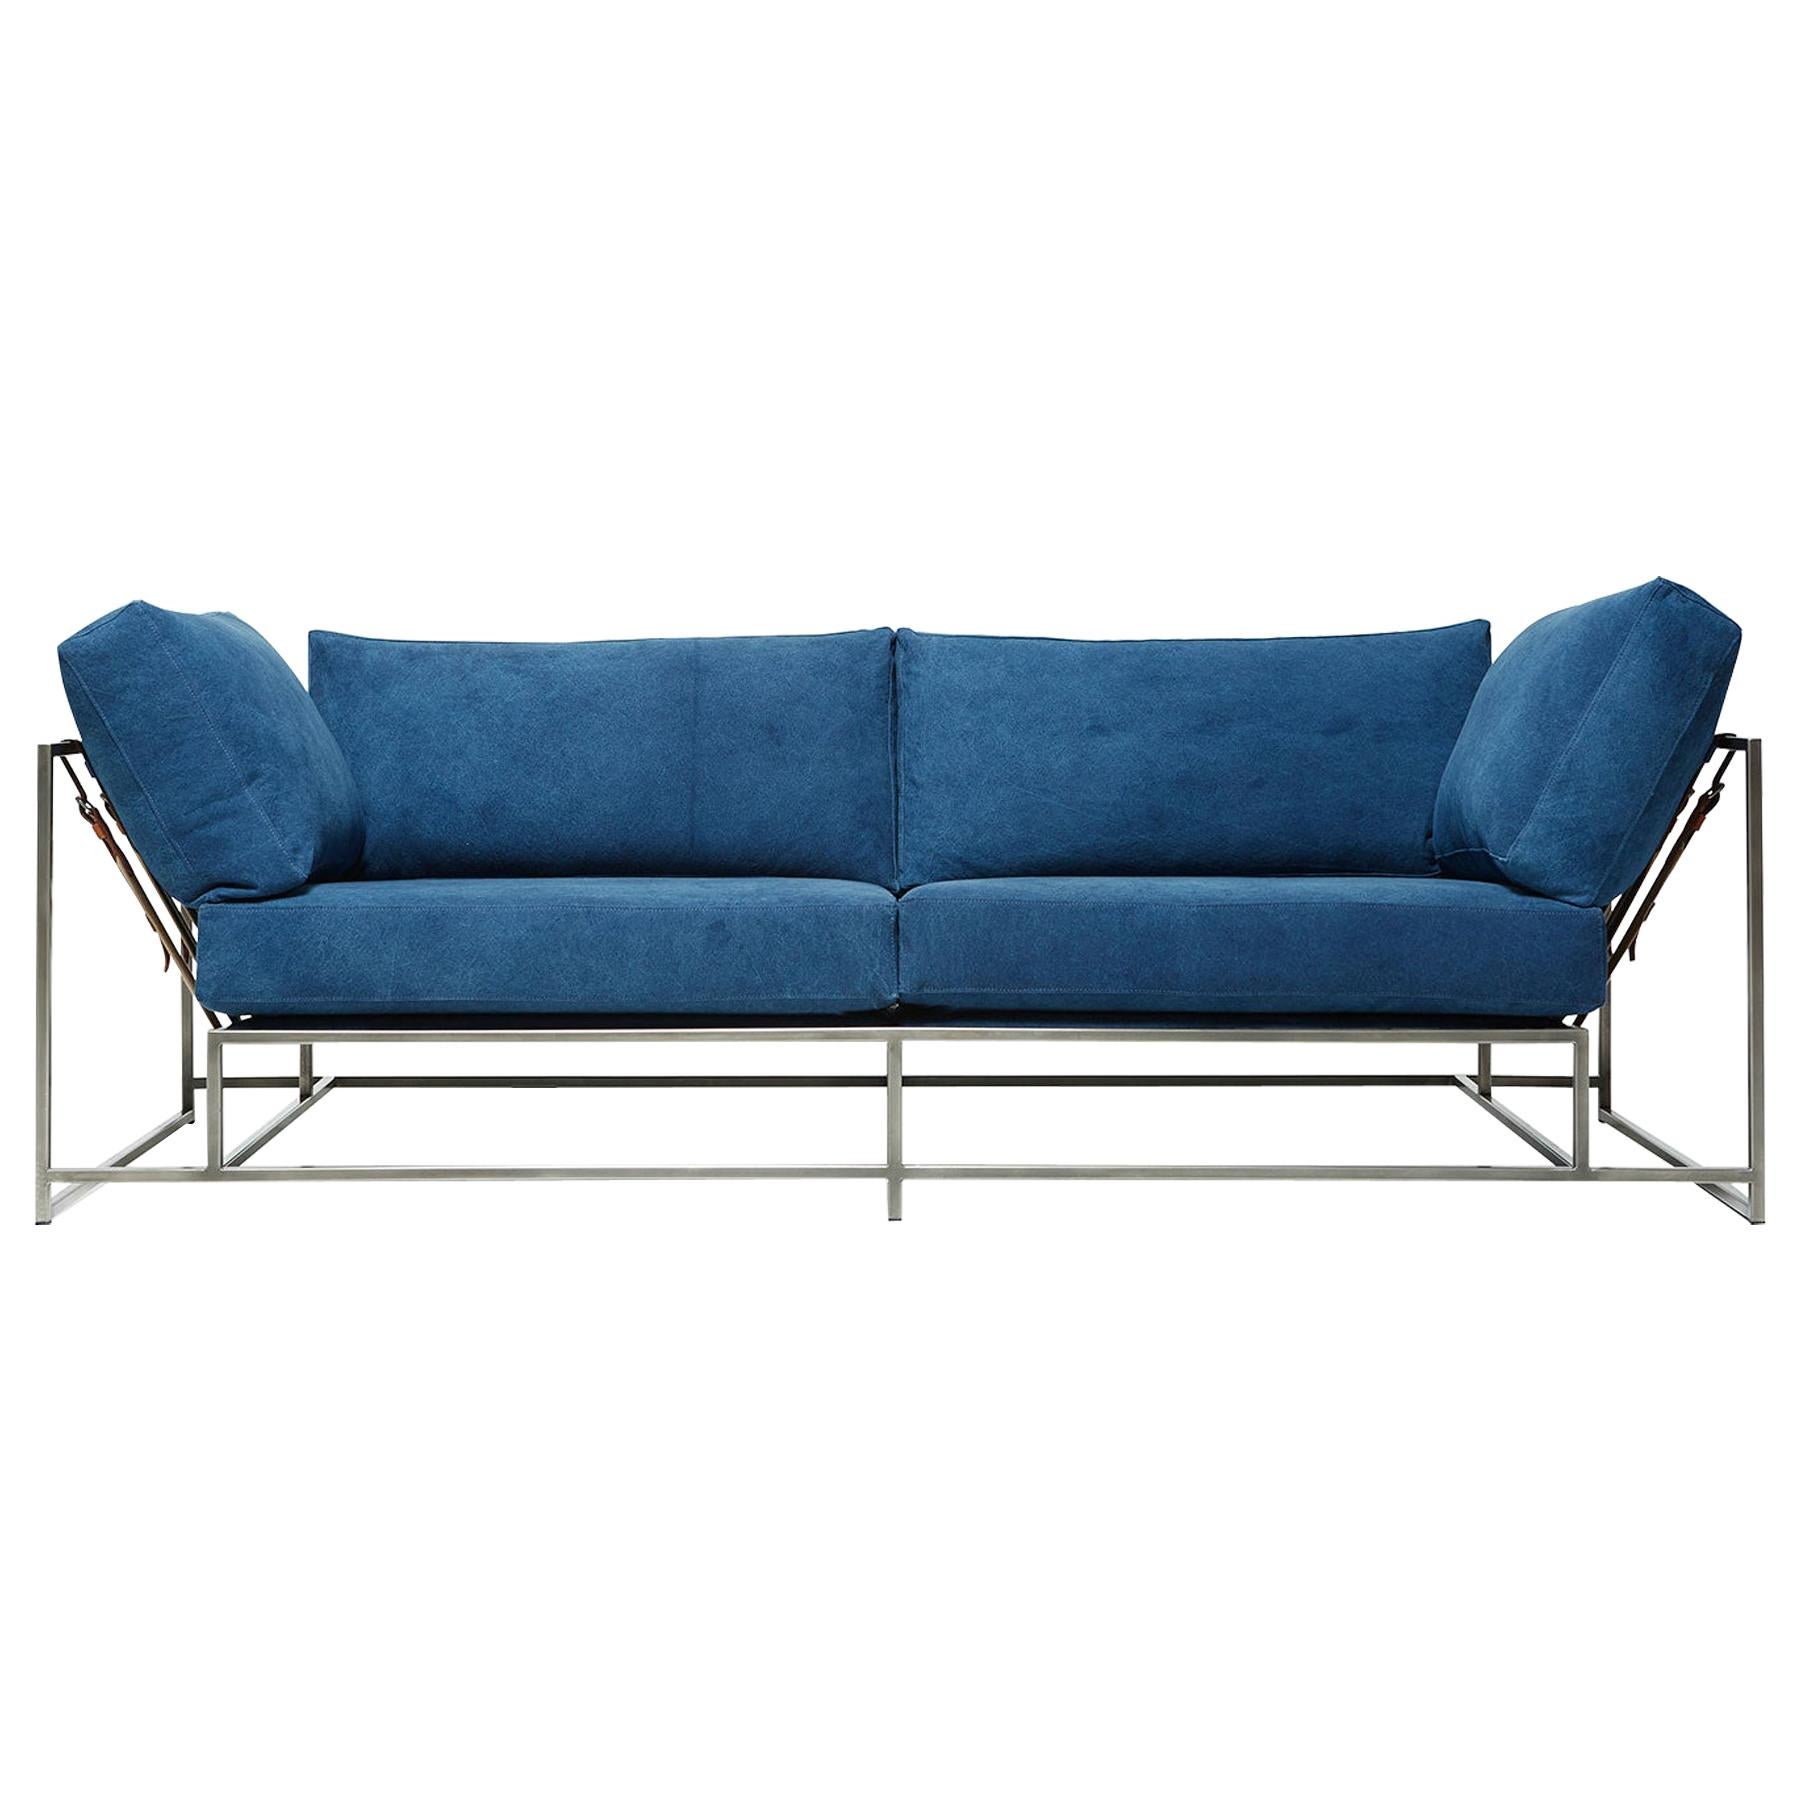 Hand-Dyed Indigo Canvas and Antique Nickel Two-Seat Sofa